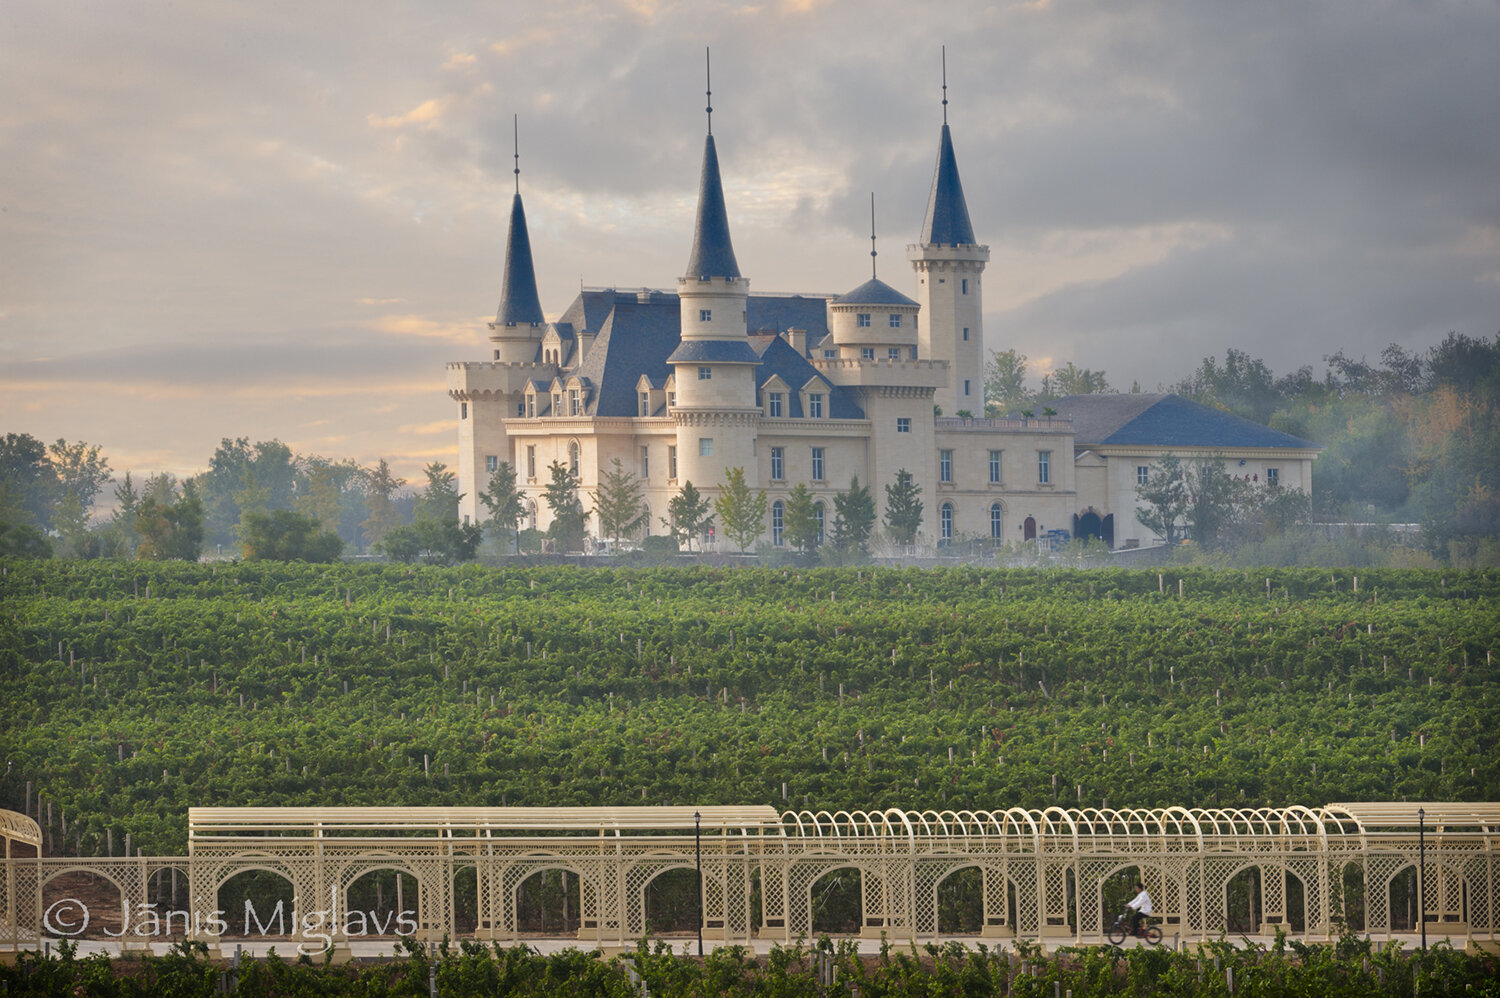 Dream-like view of castle at Chateau Changyu AFIP Global winery near Beijing.